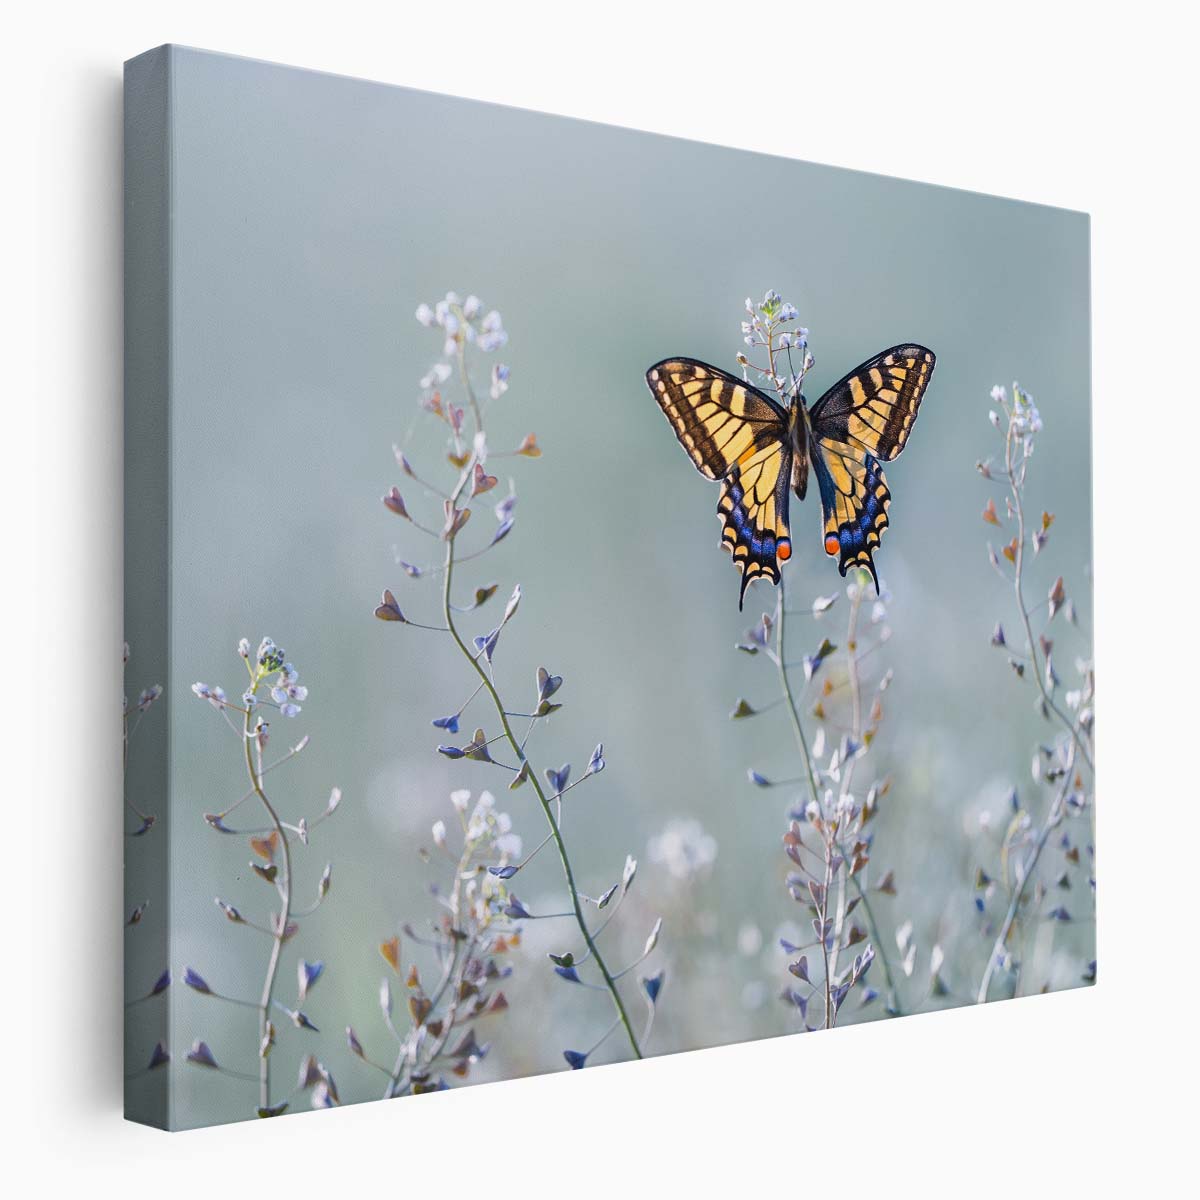 Swallowtail Butterfly & Floral Meadow Macro Wall Art by Luxuriance Designs. Made in USA.